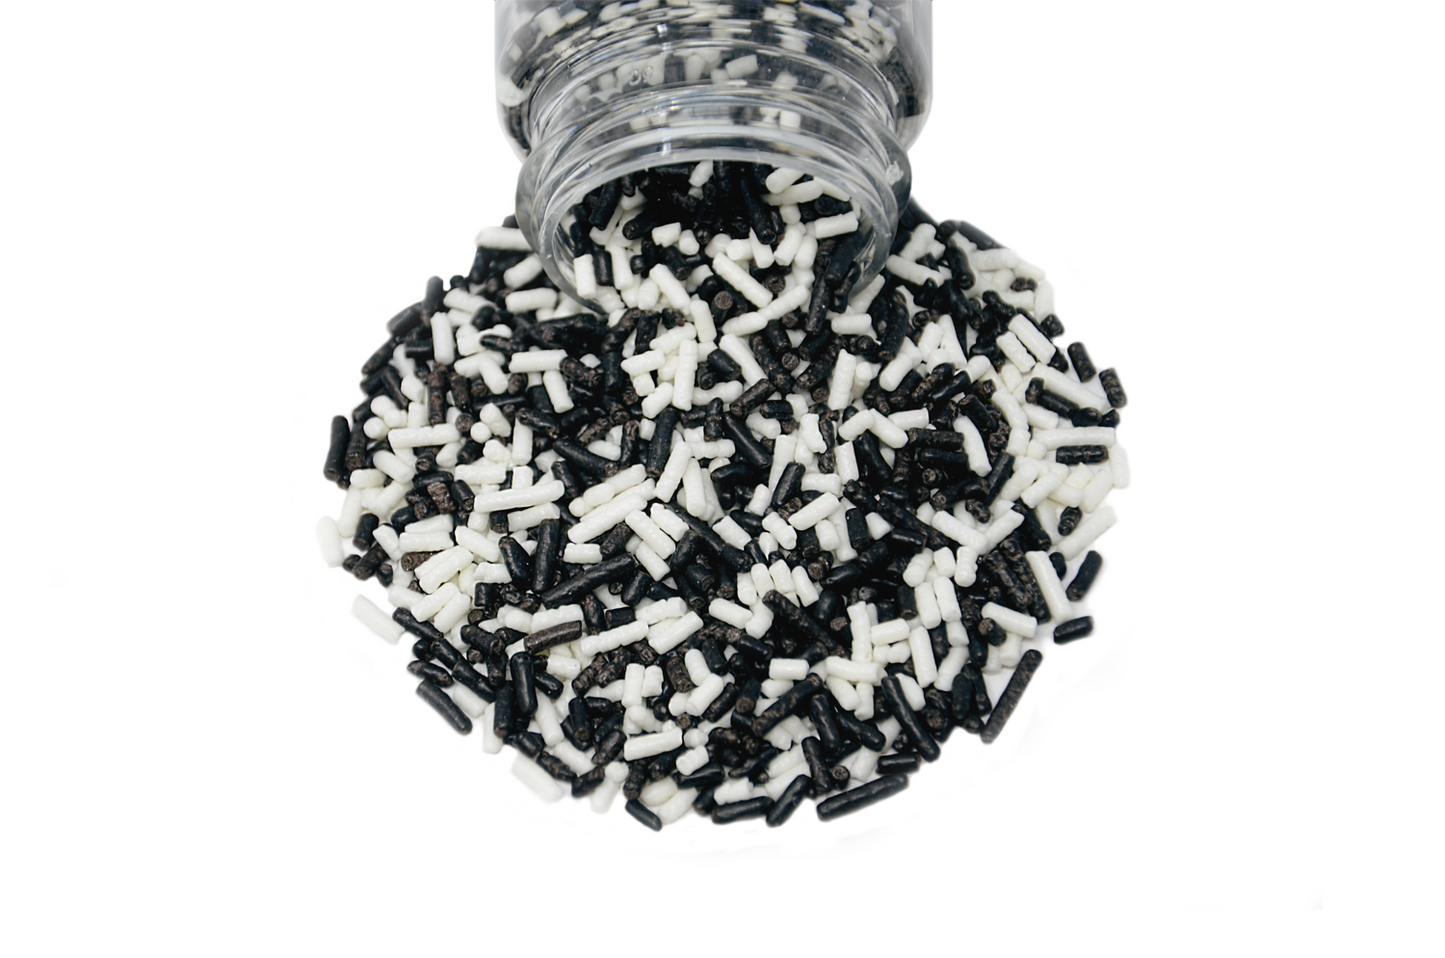 Load image into Gallery viewer, Tuxedo Mix Jimmies Sprinkles 3oz Bottle
